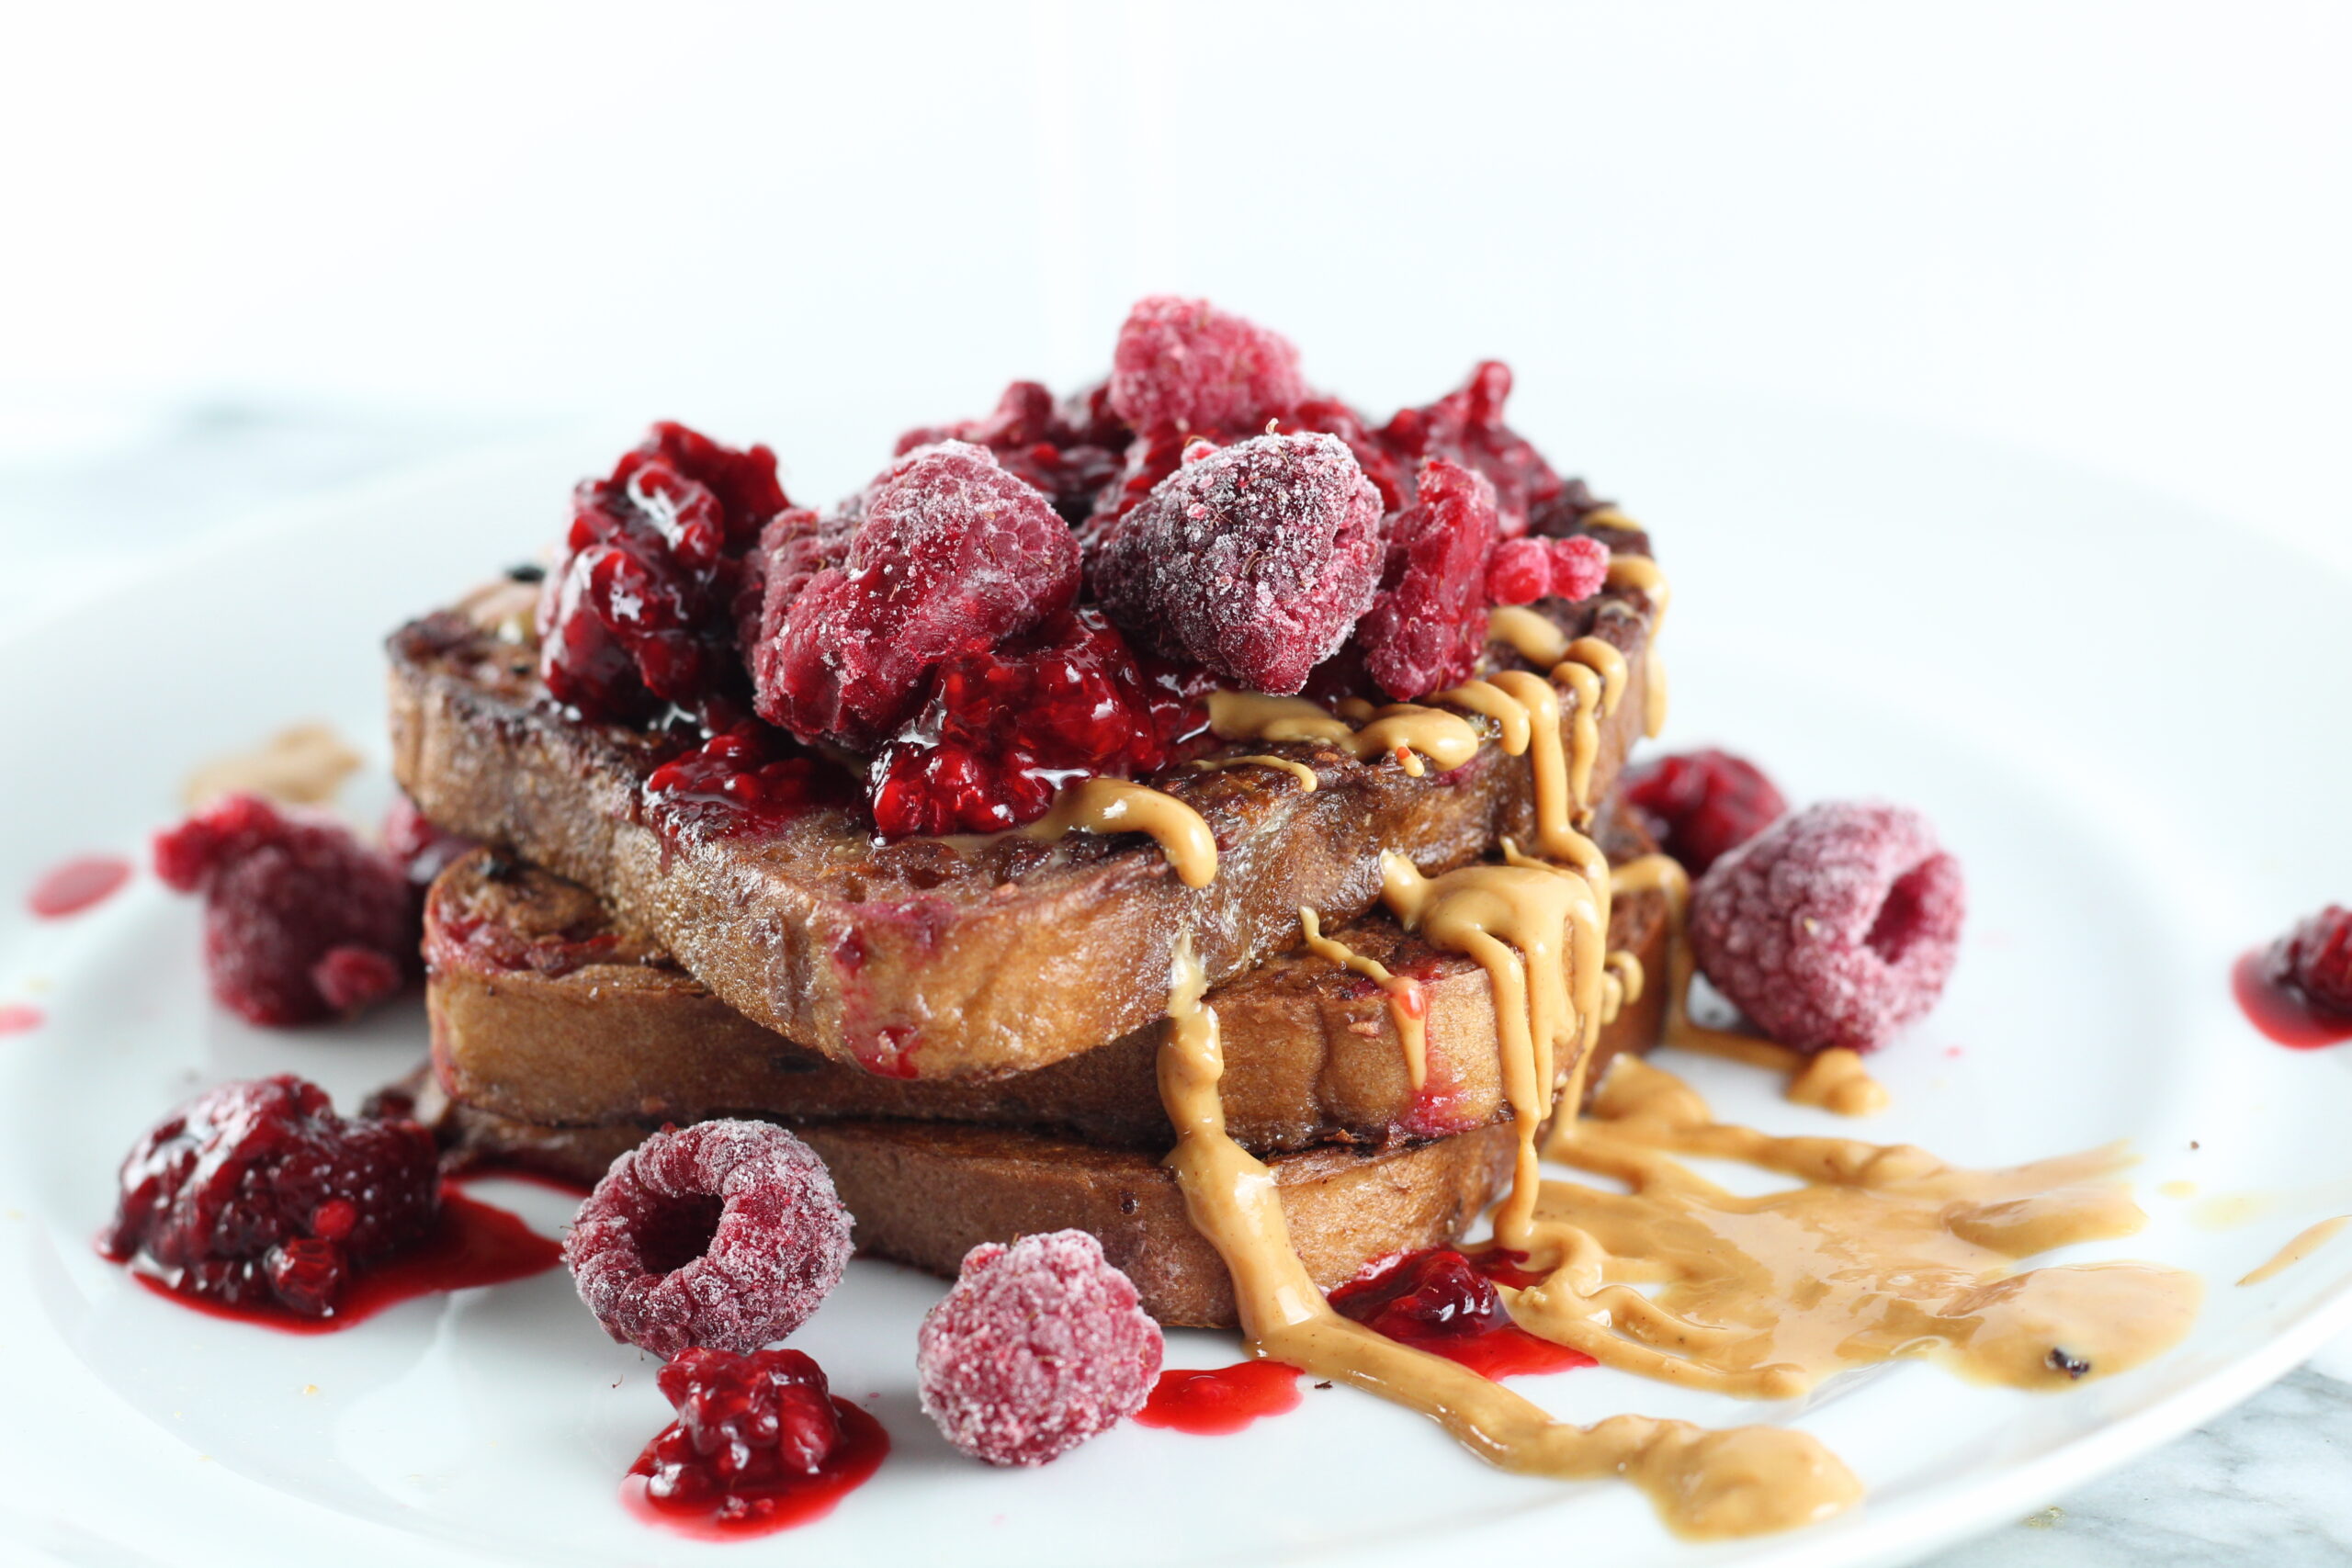 Raspberry French Toast drizzled with peanut butter